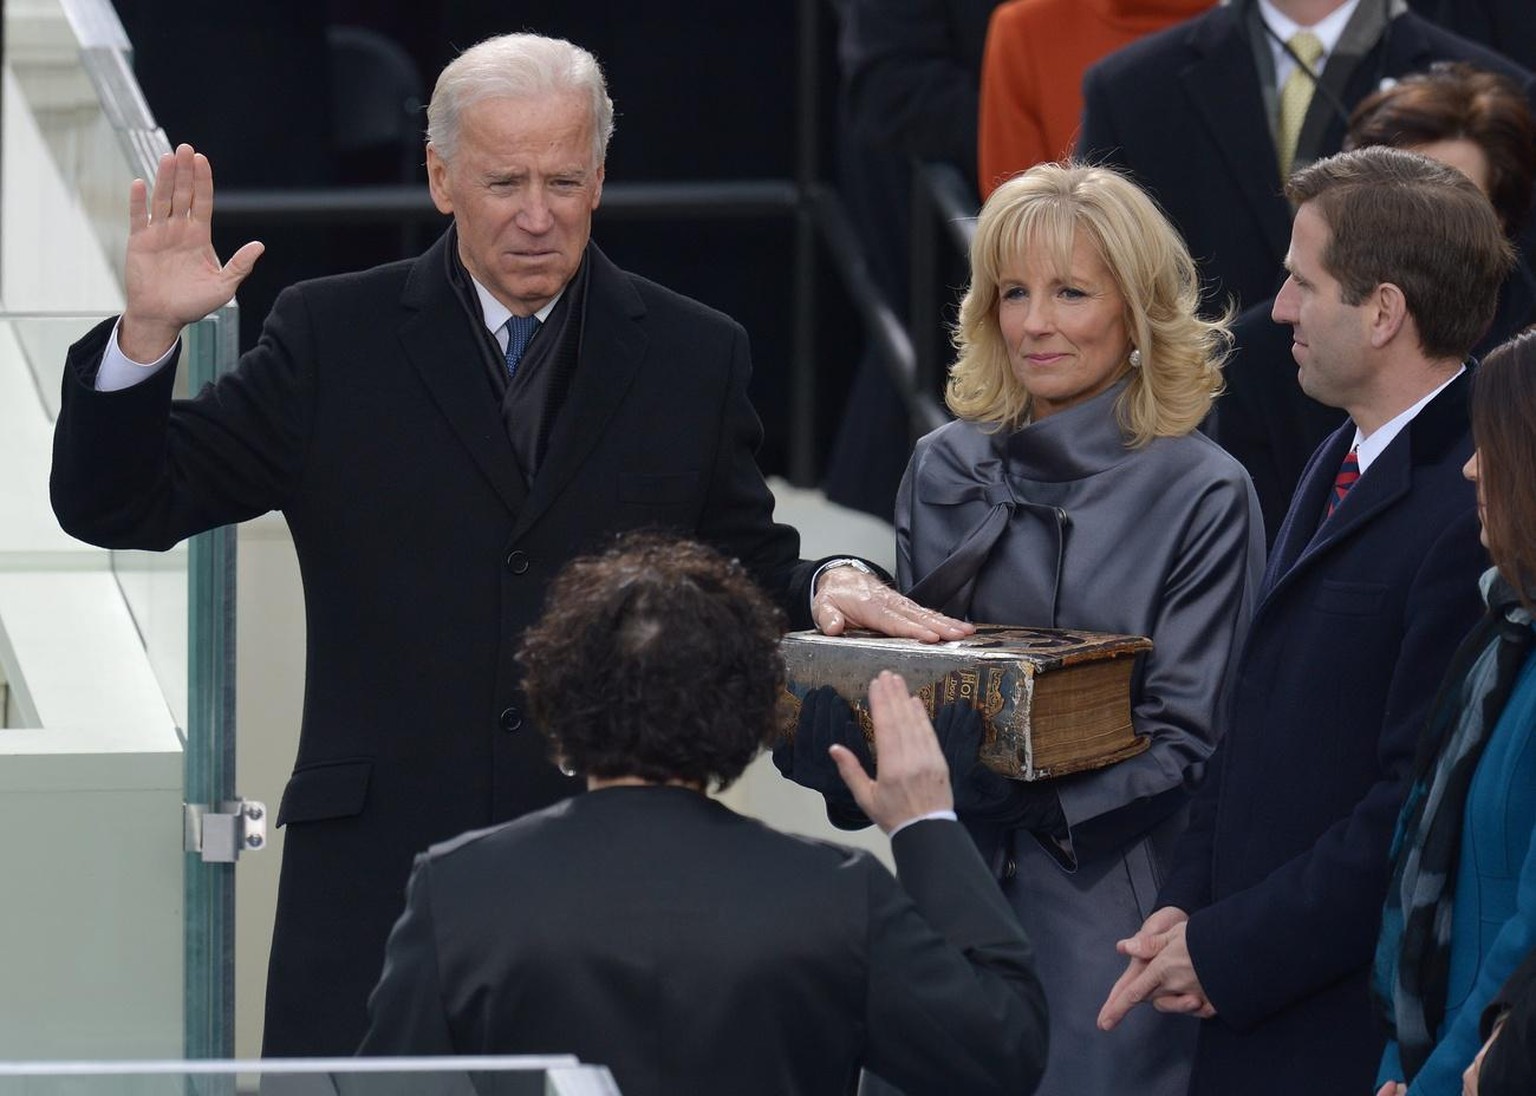 epa03548393 US Vice President Joe Biden (L) places his hand on a bible held by his wife Dr. Jill Biden (C) as he takes the ceremonial oath of office from Supreme Court Justice Sonia Sotomayor (2nd L)  ...